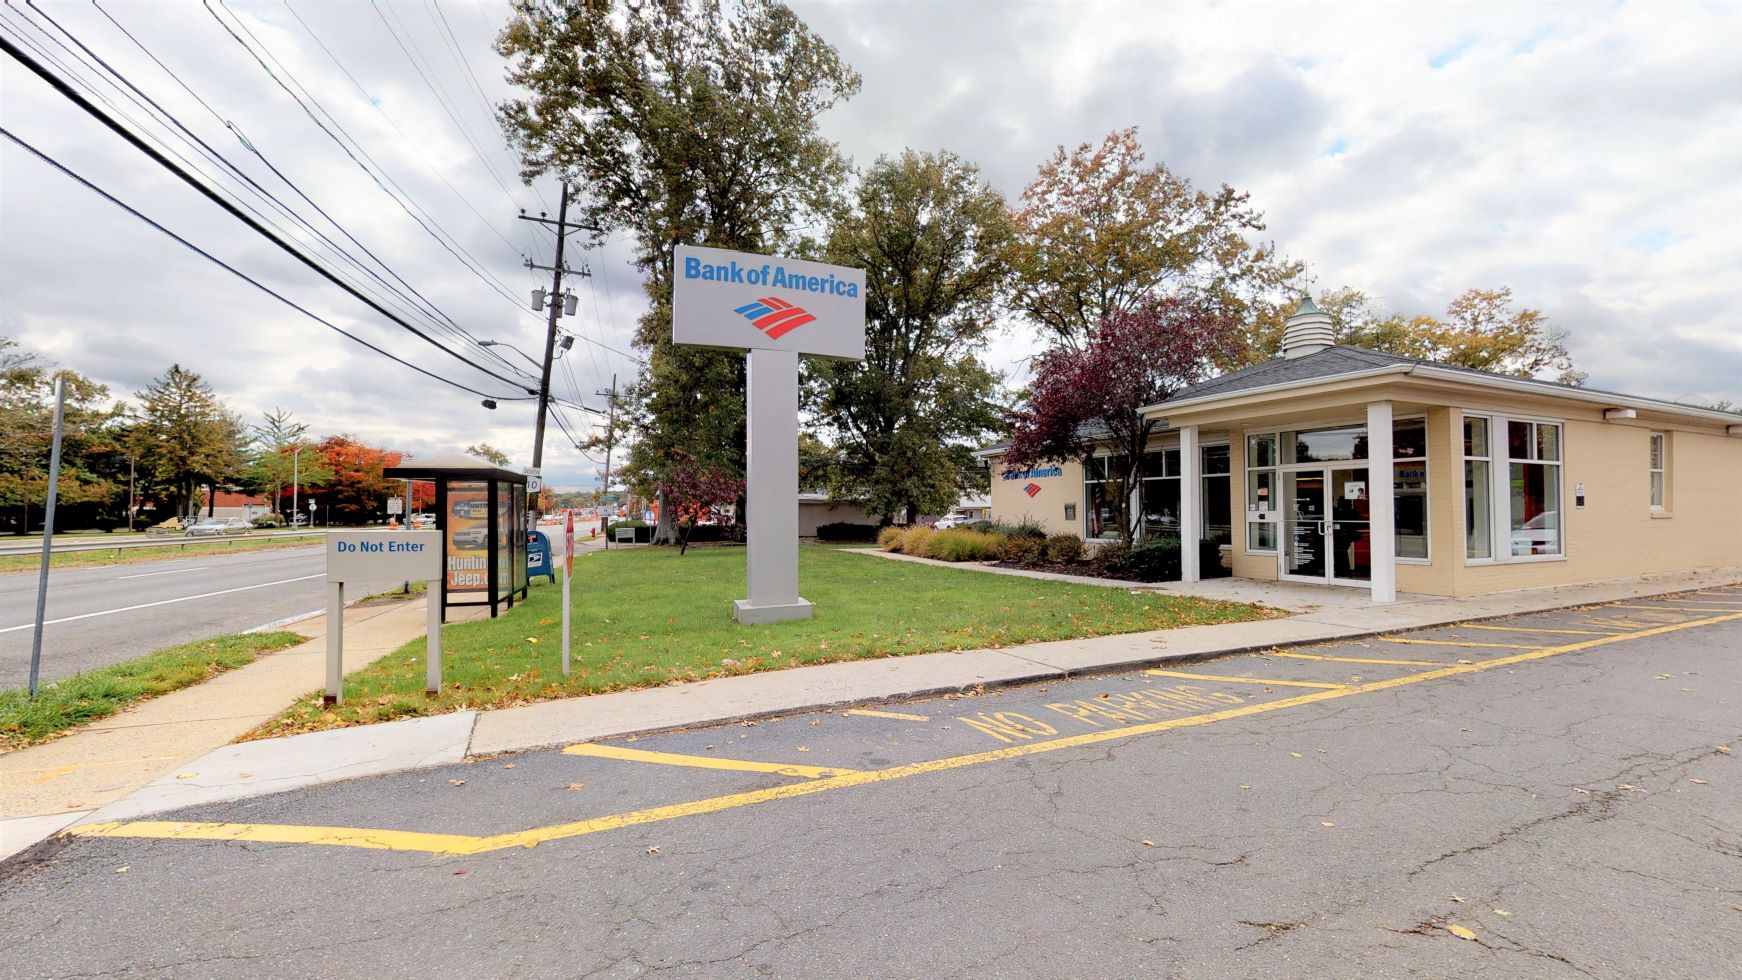 Bank of America financial center with drive-thru ATM | 101 Walt Whitman Rd, Huntington Station, NY 11746